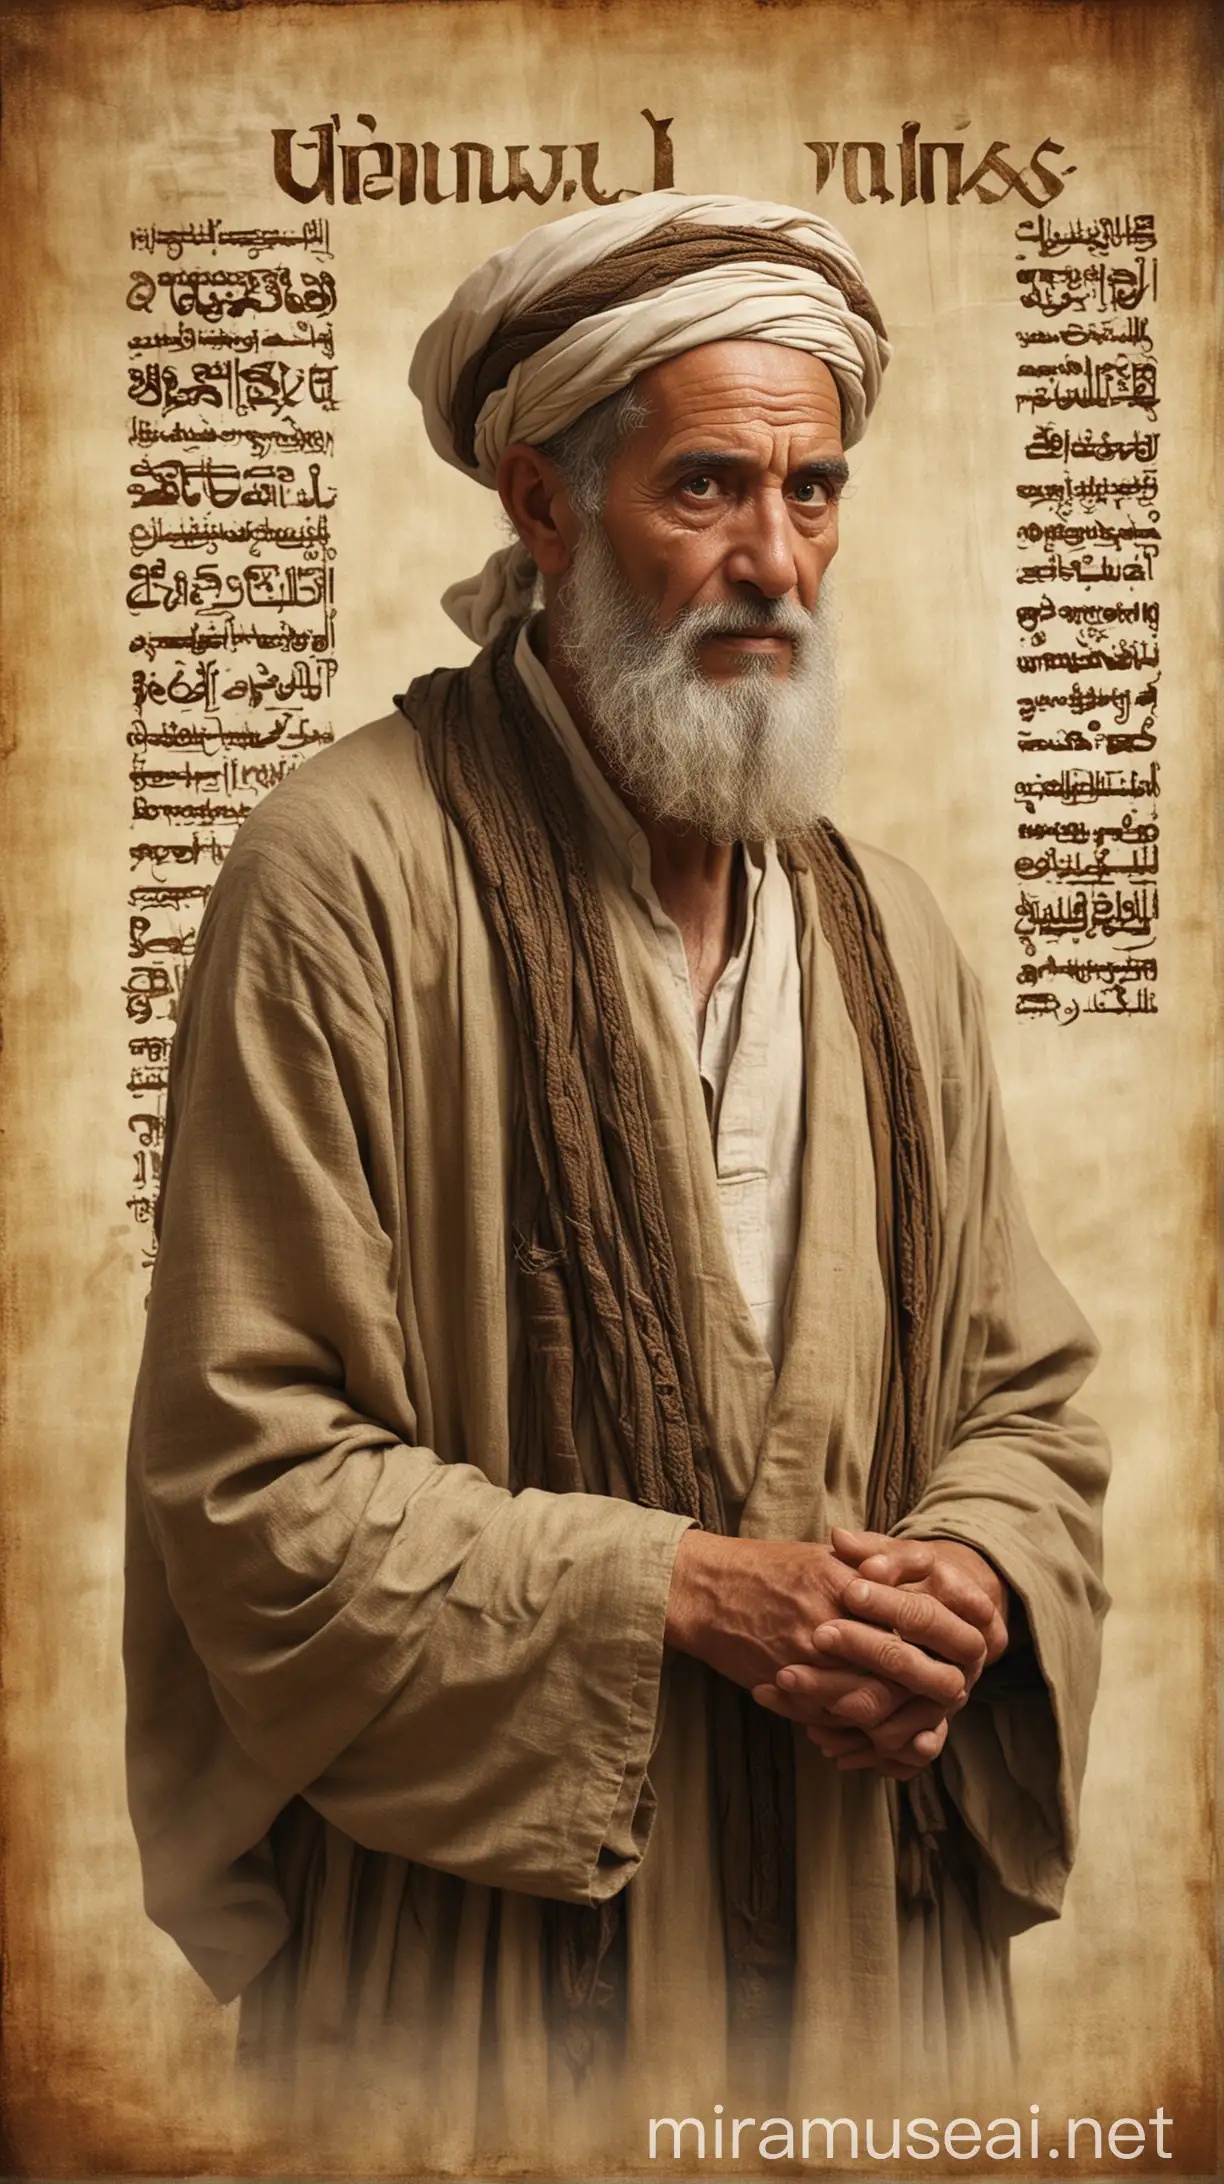 Create an image of a distinguished ancient man with a solemn expression, representing Ithmah. Beside him, display the word "Ithmah" with its Hebrew characters and the translation "Orphanage." Include a subtle background hinting at historical texts or a scroll.In ancient world 